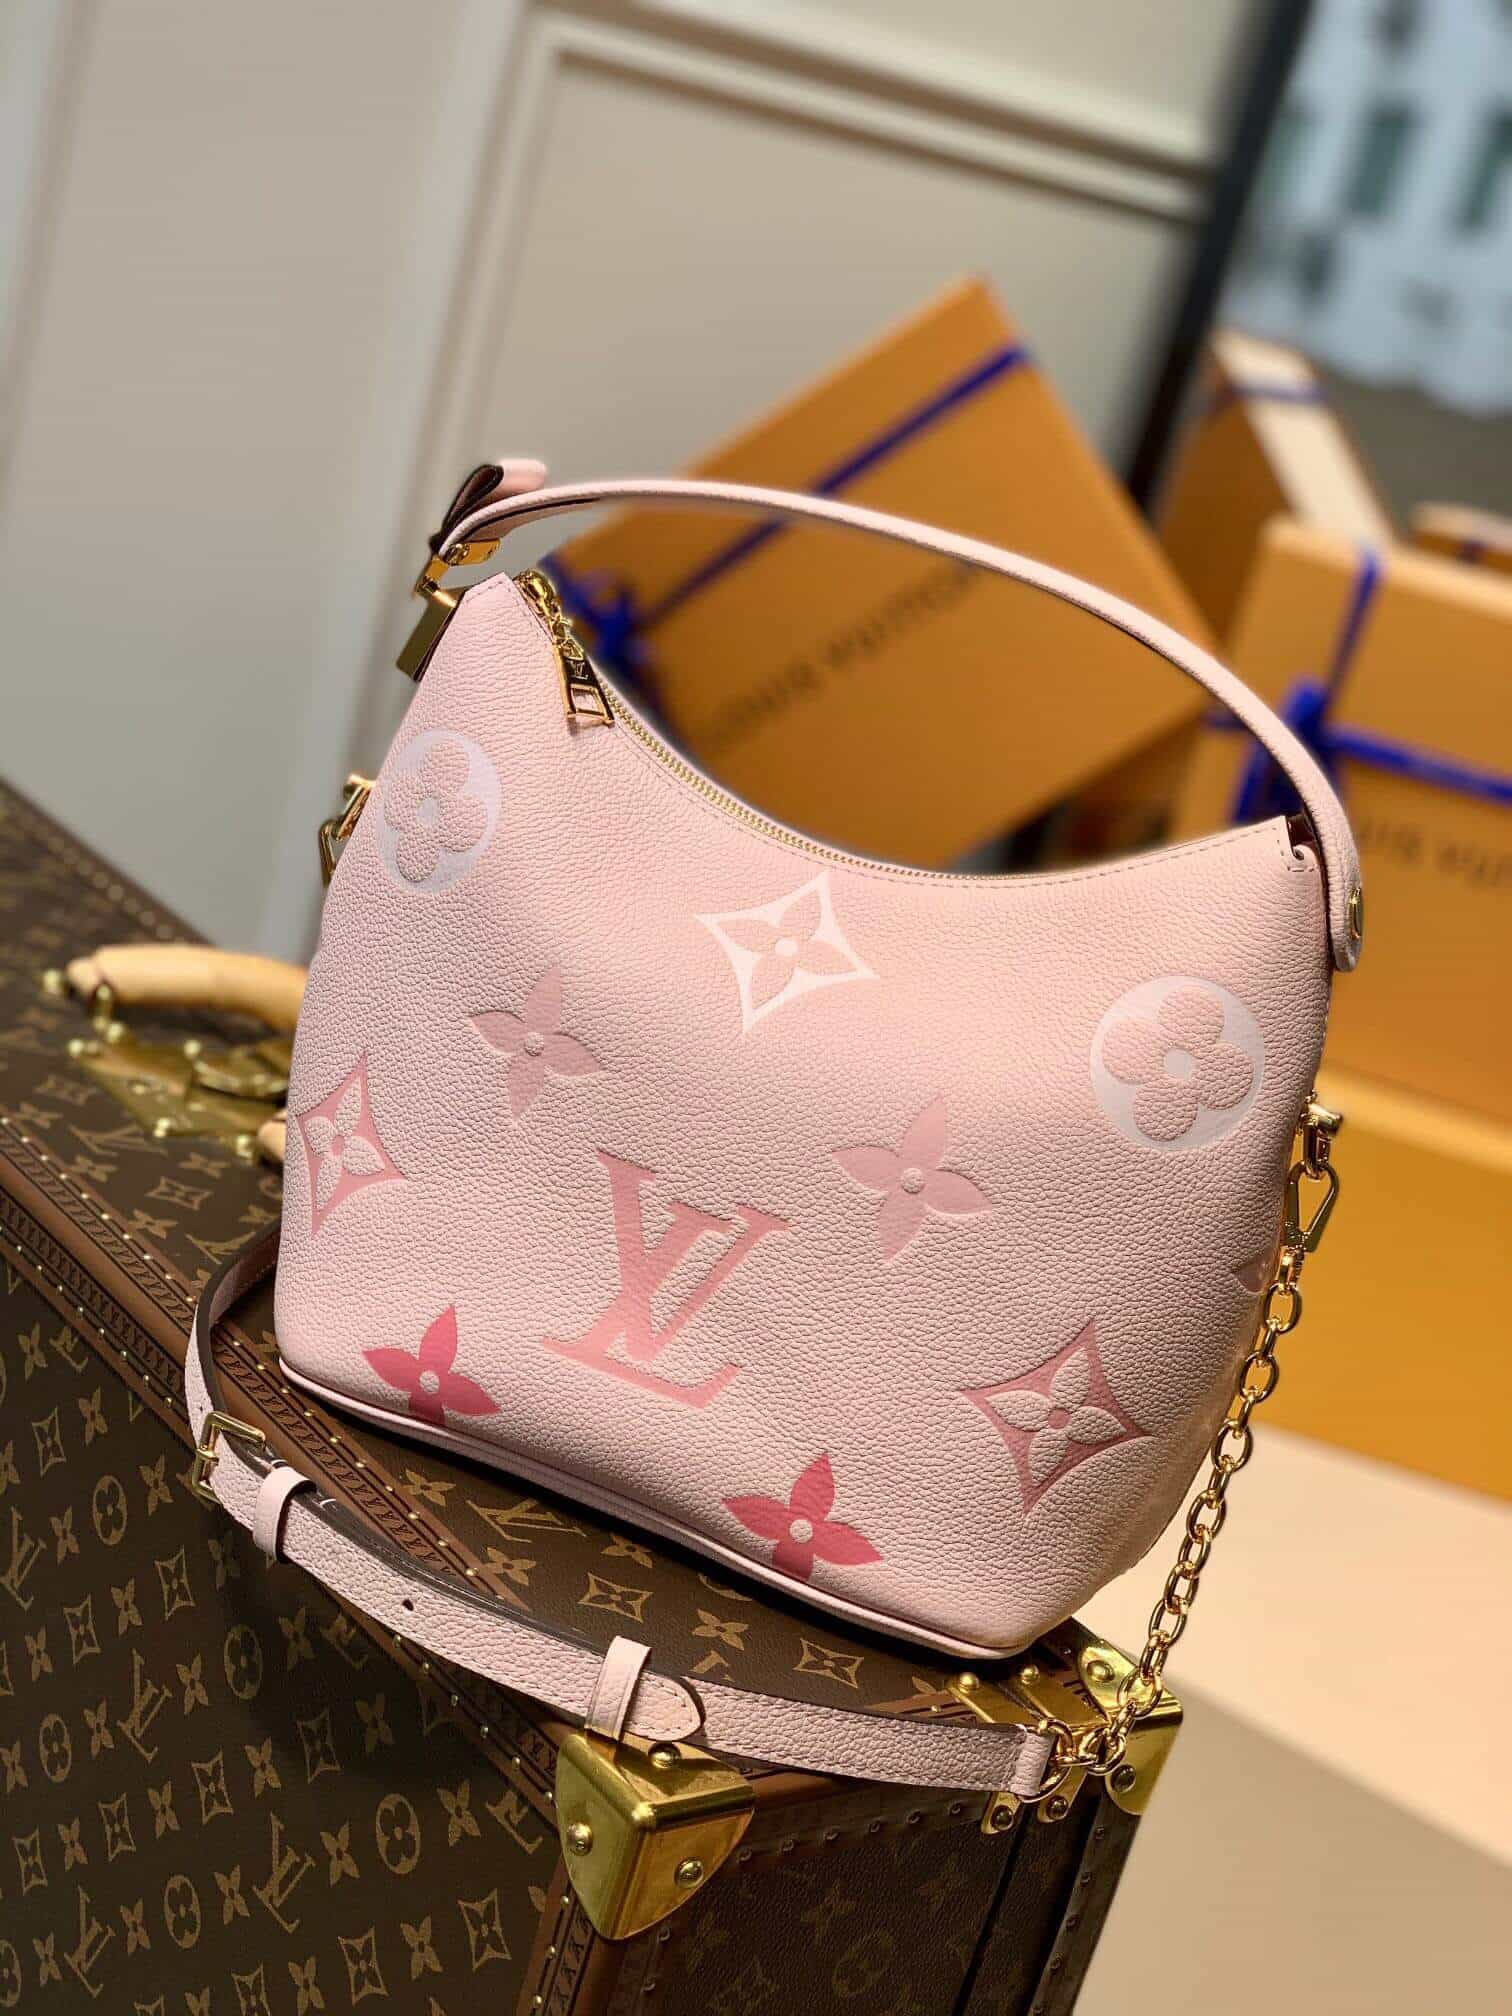 Shop Louis Vuitton Marshmallow (M45697) by inthewall